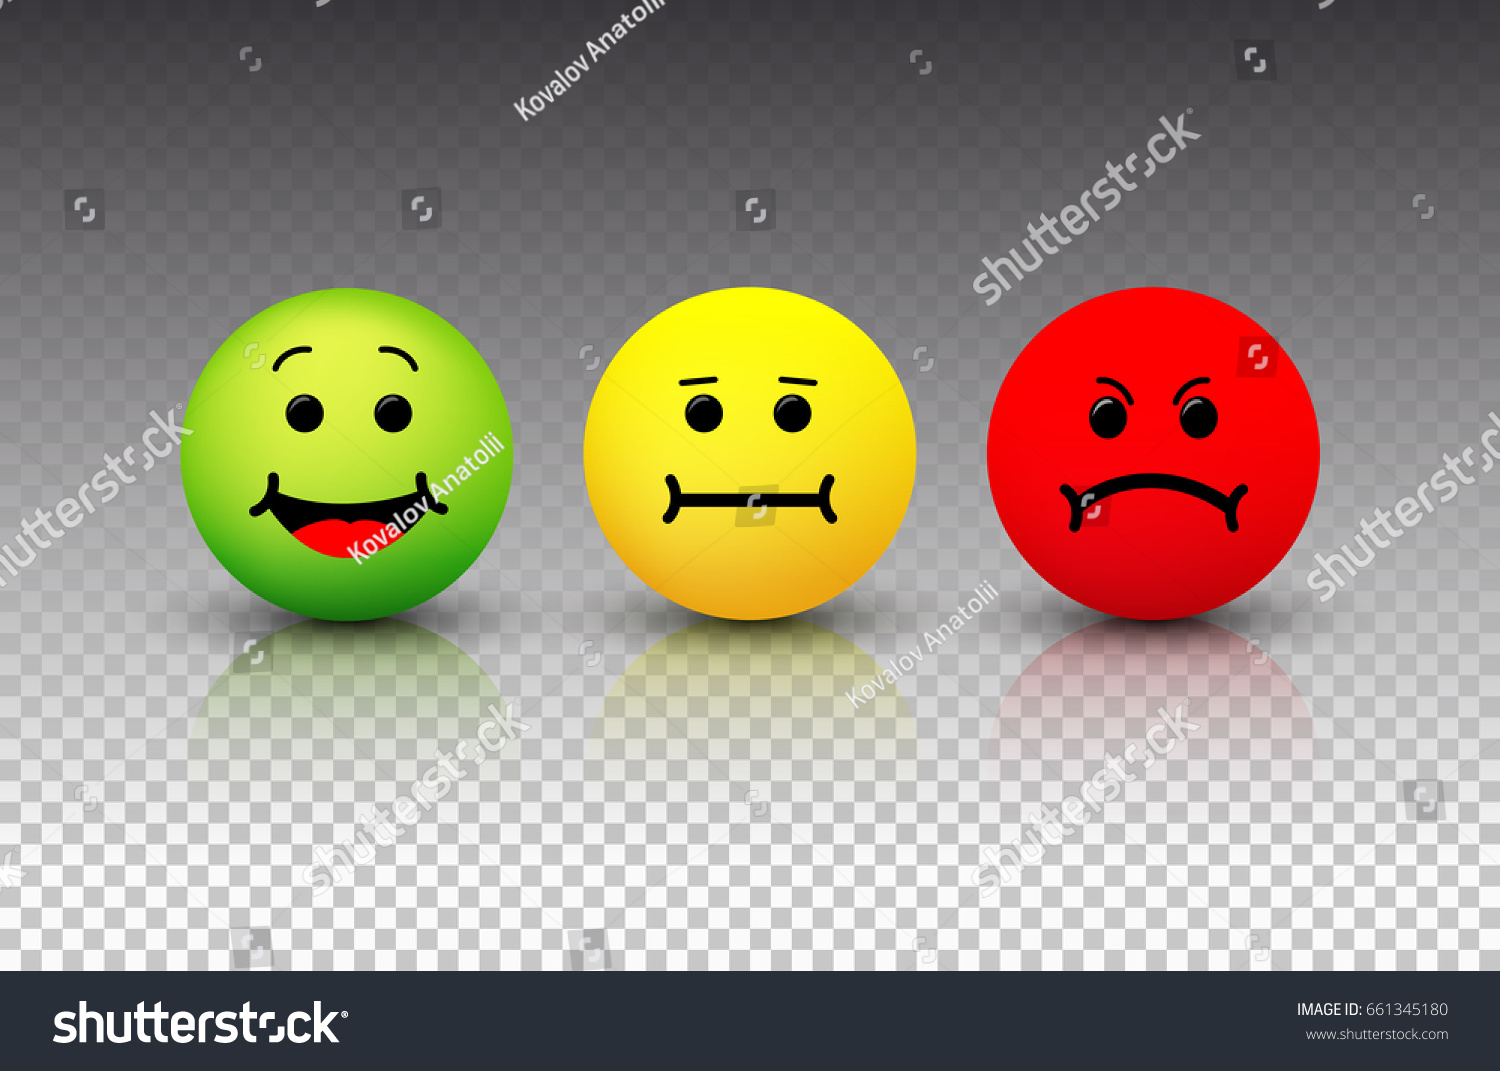 Smiley Icon Emotions Positive Neutral Negative Stock Vector Royalty